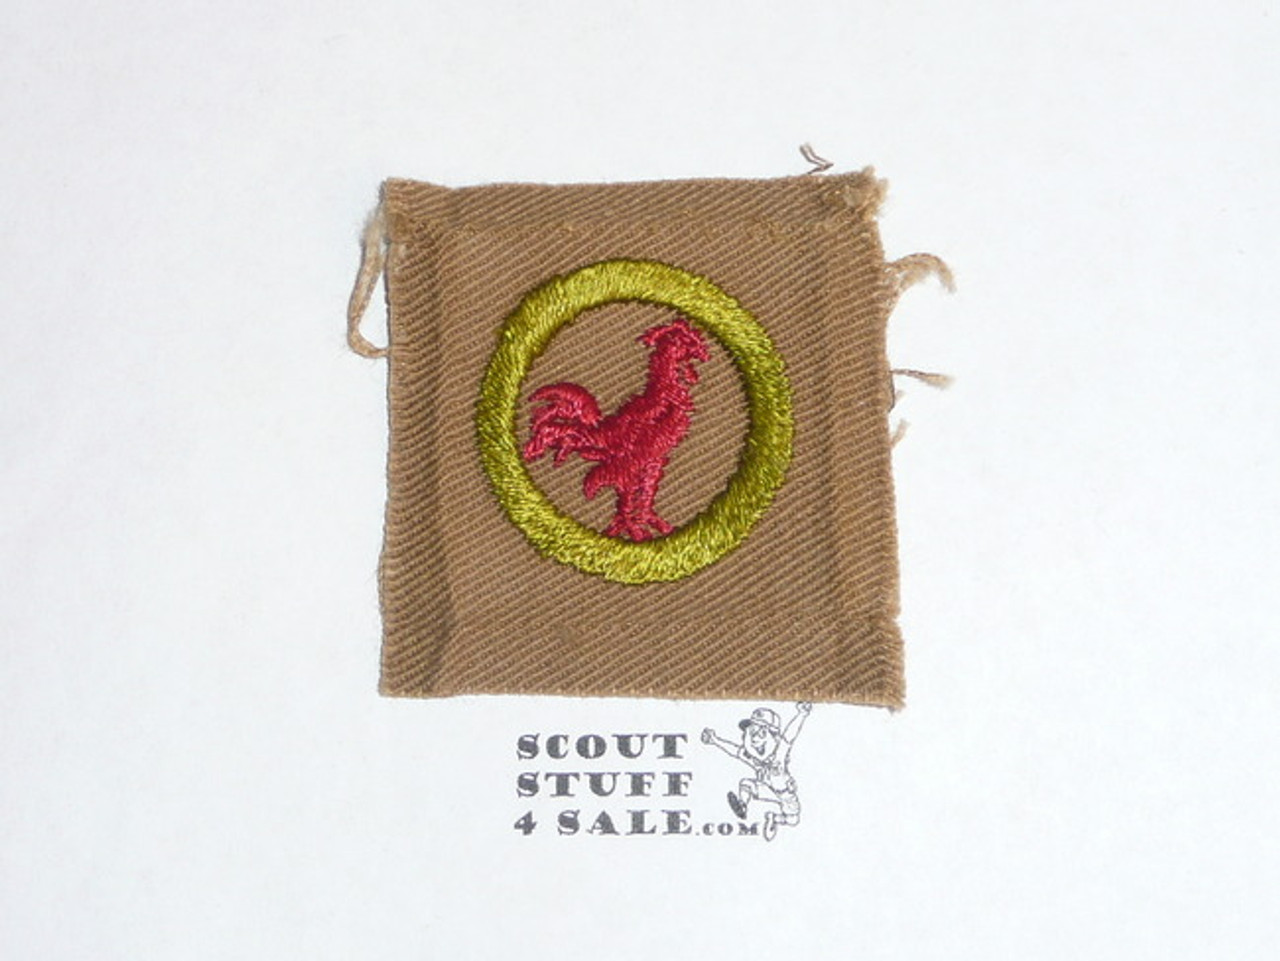 Poultry Keeping - Type A - Square Tan Merit Badge (1911-1933), lt use